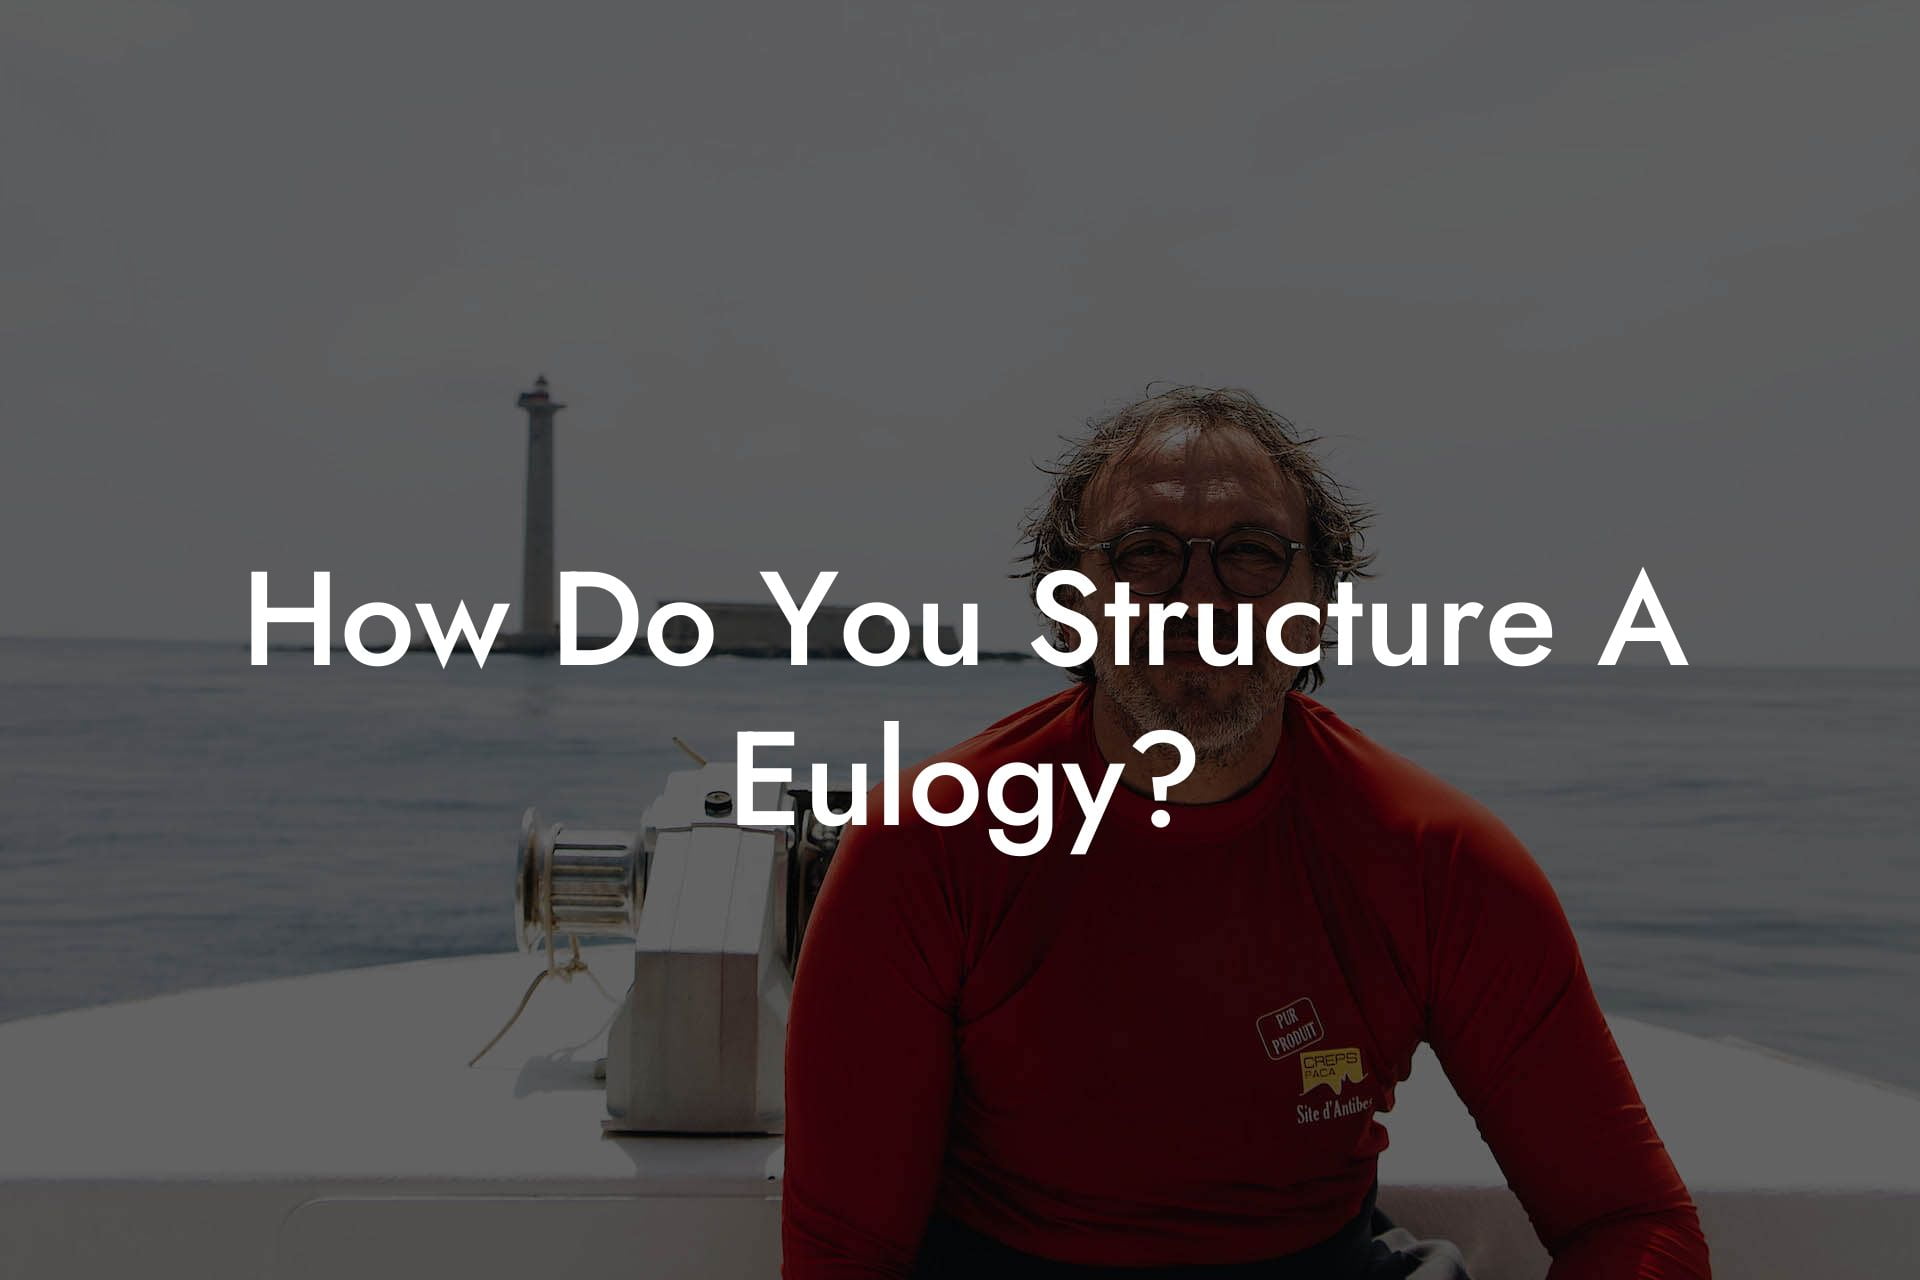 How Do You Structure A Eulogy?